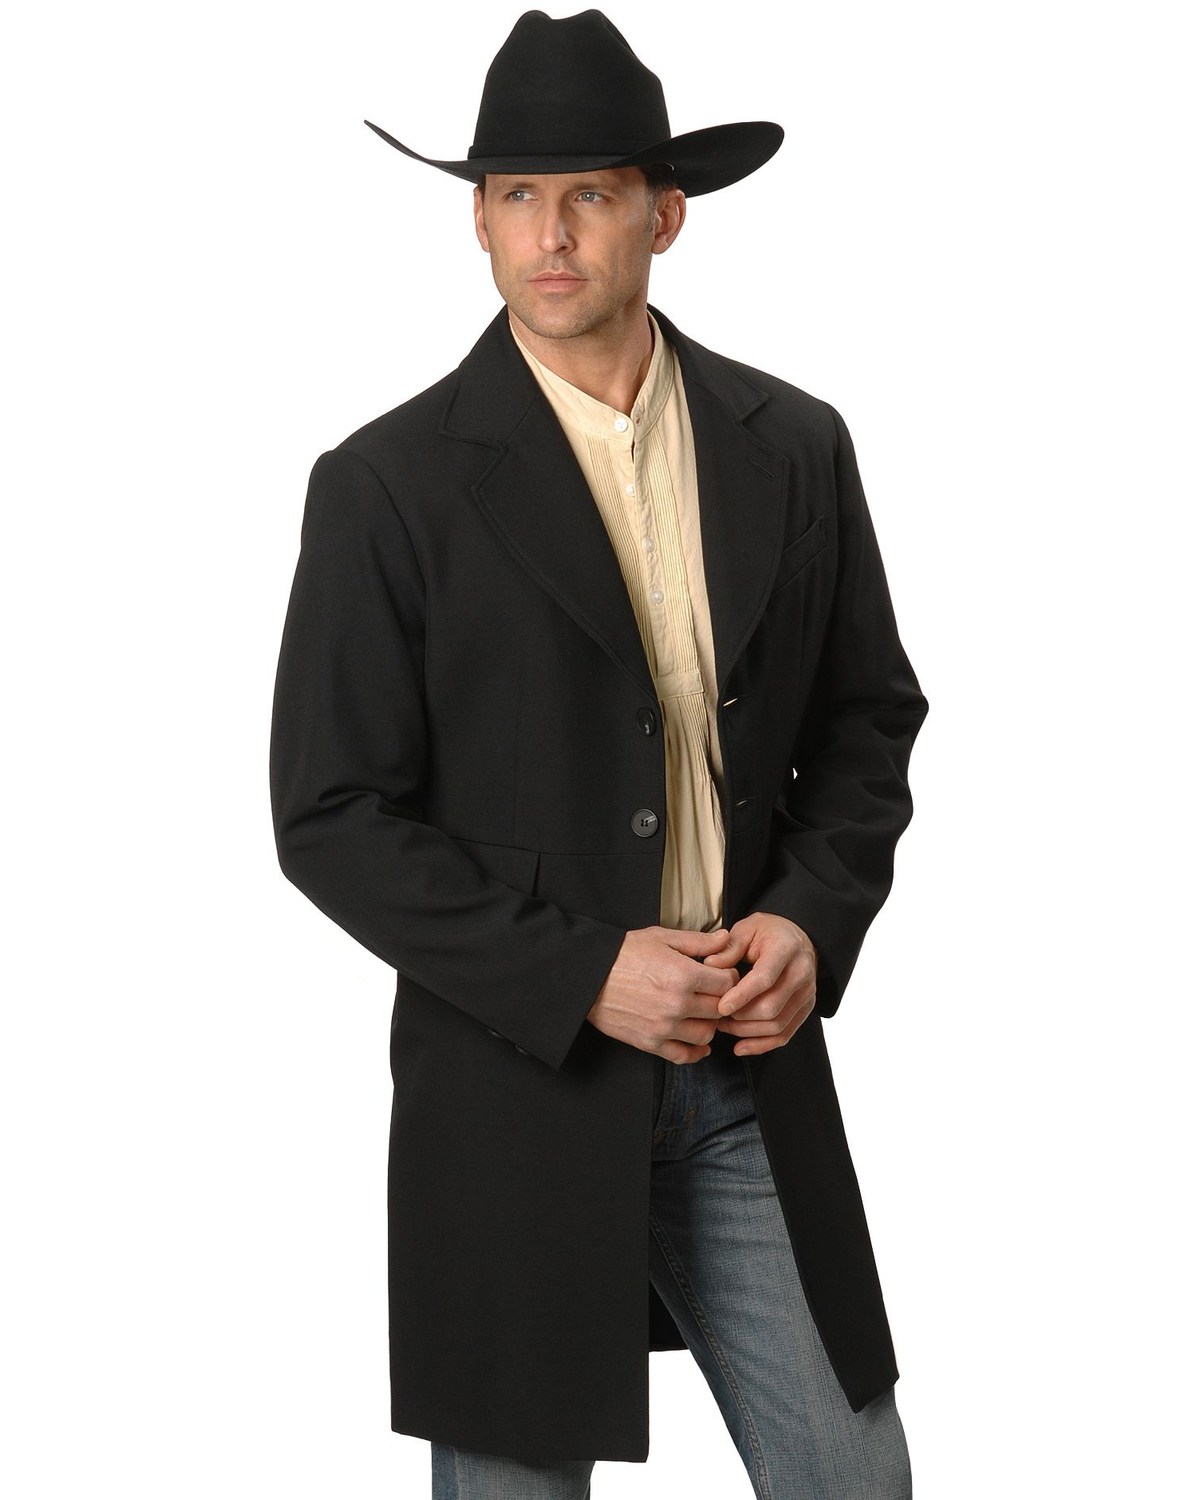 WahMaker by Scully Wool Blend Frock Coat - Big & Tall | Boot Barn